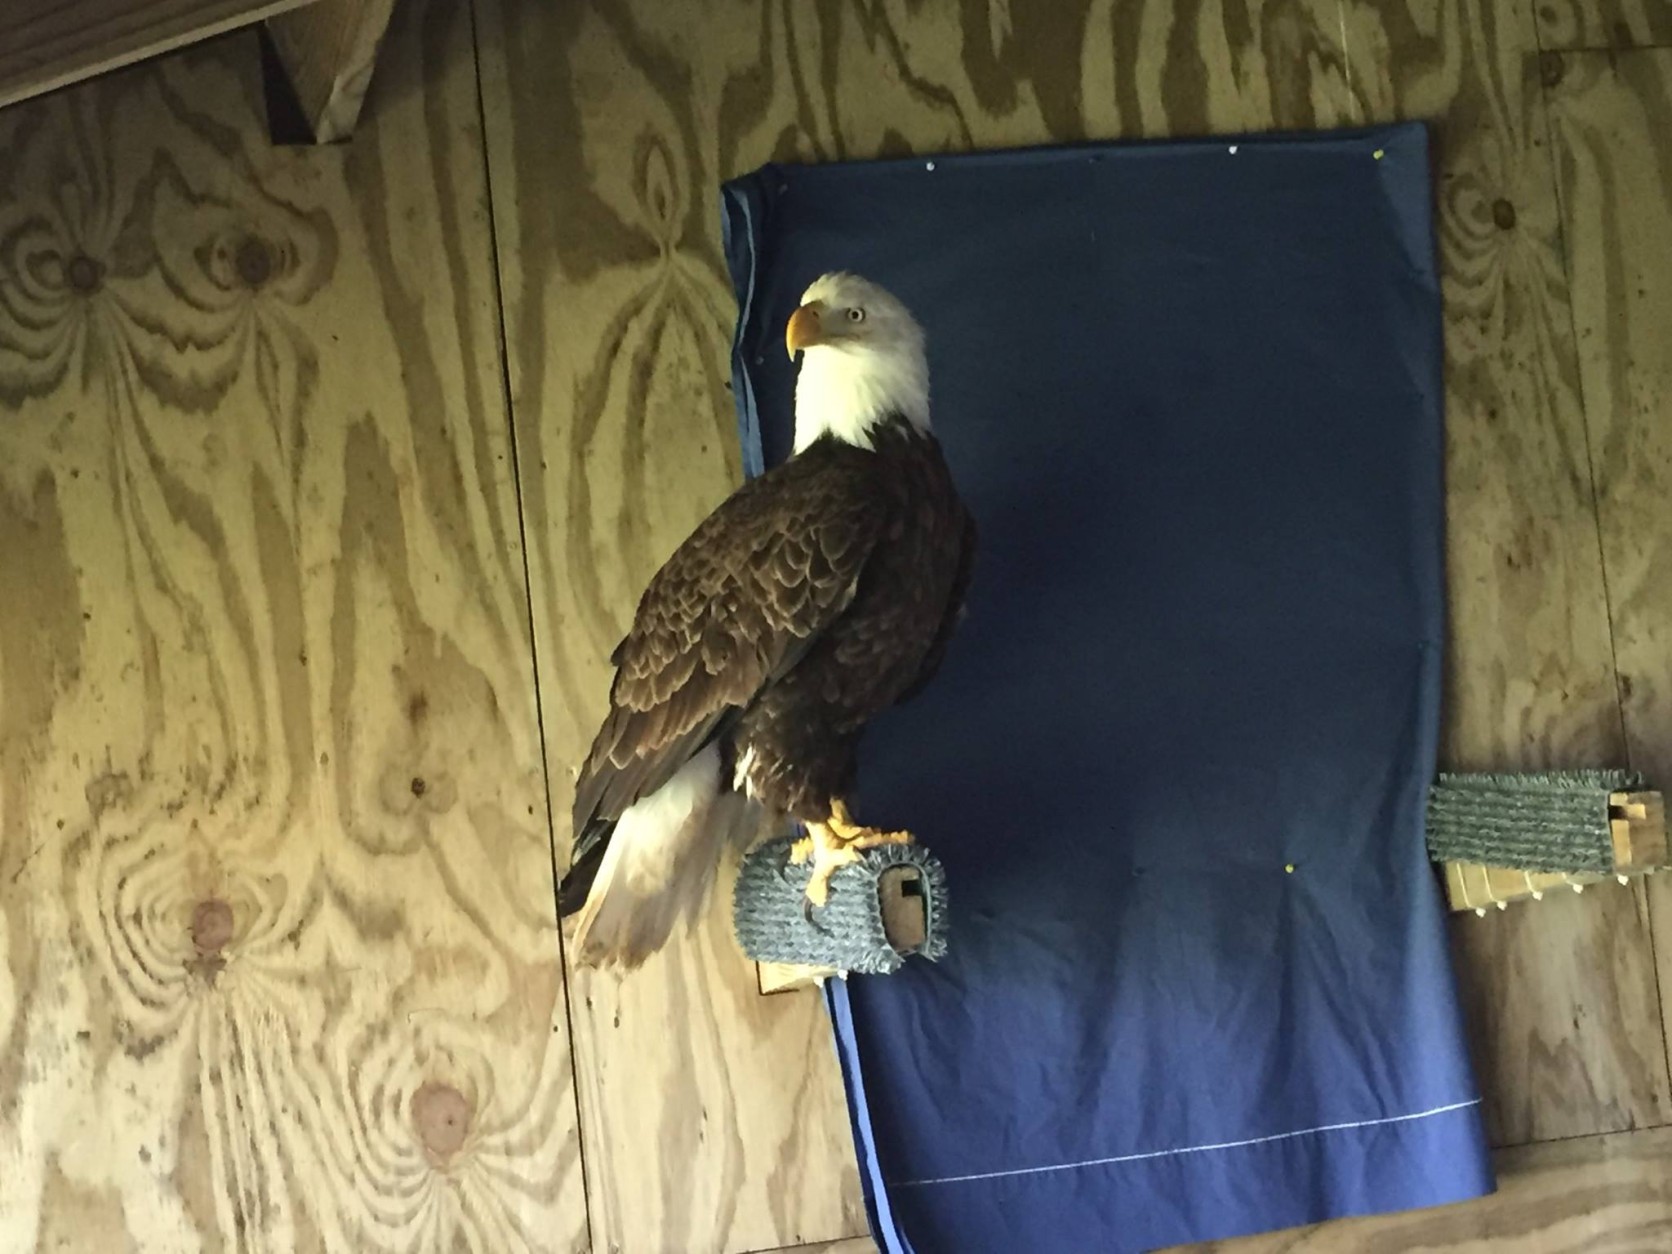 A bald eagle named "Trust" was found injured in a backward in Potomac, Md., in March. (Courtesy Owl Moon Raptor Center)